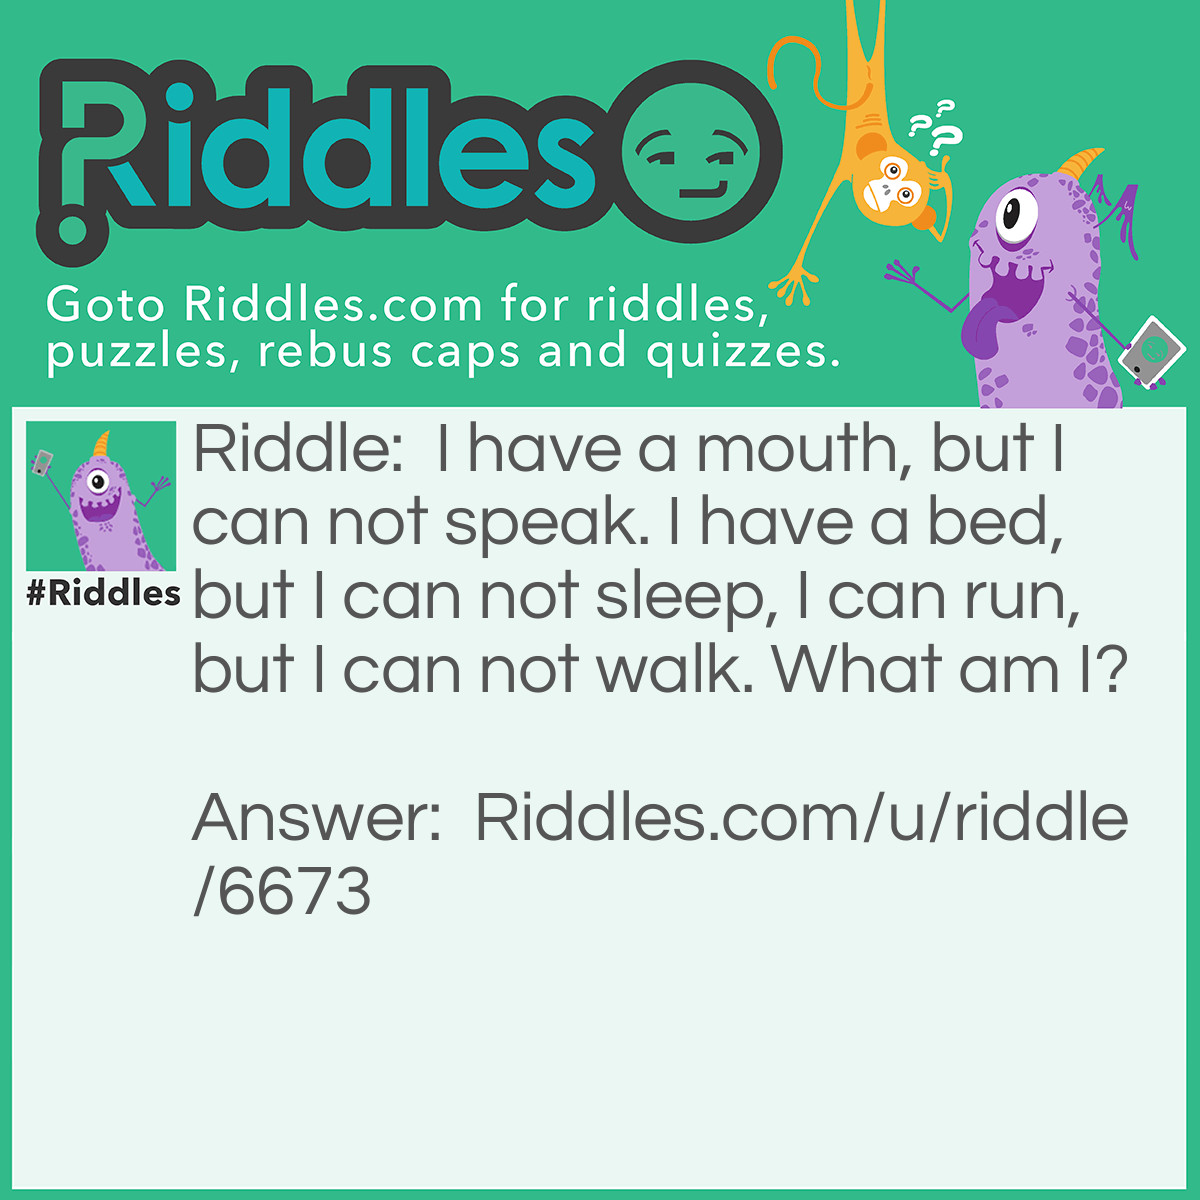 Riddle: I have a mouth, but I can not speak. I have a bed, but I can not sleep, I can run, but I can not walk. What am I? Answer: A river.